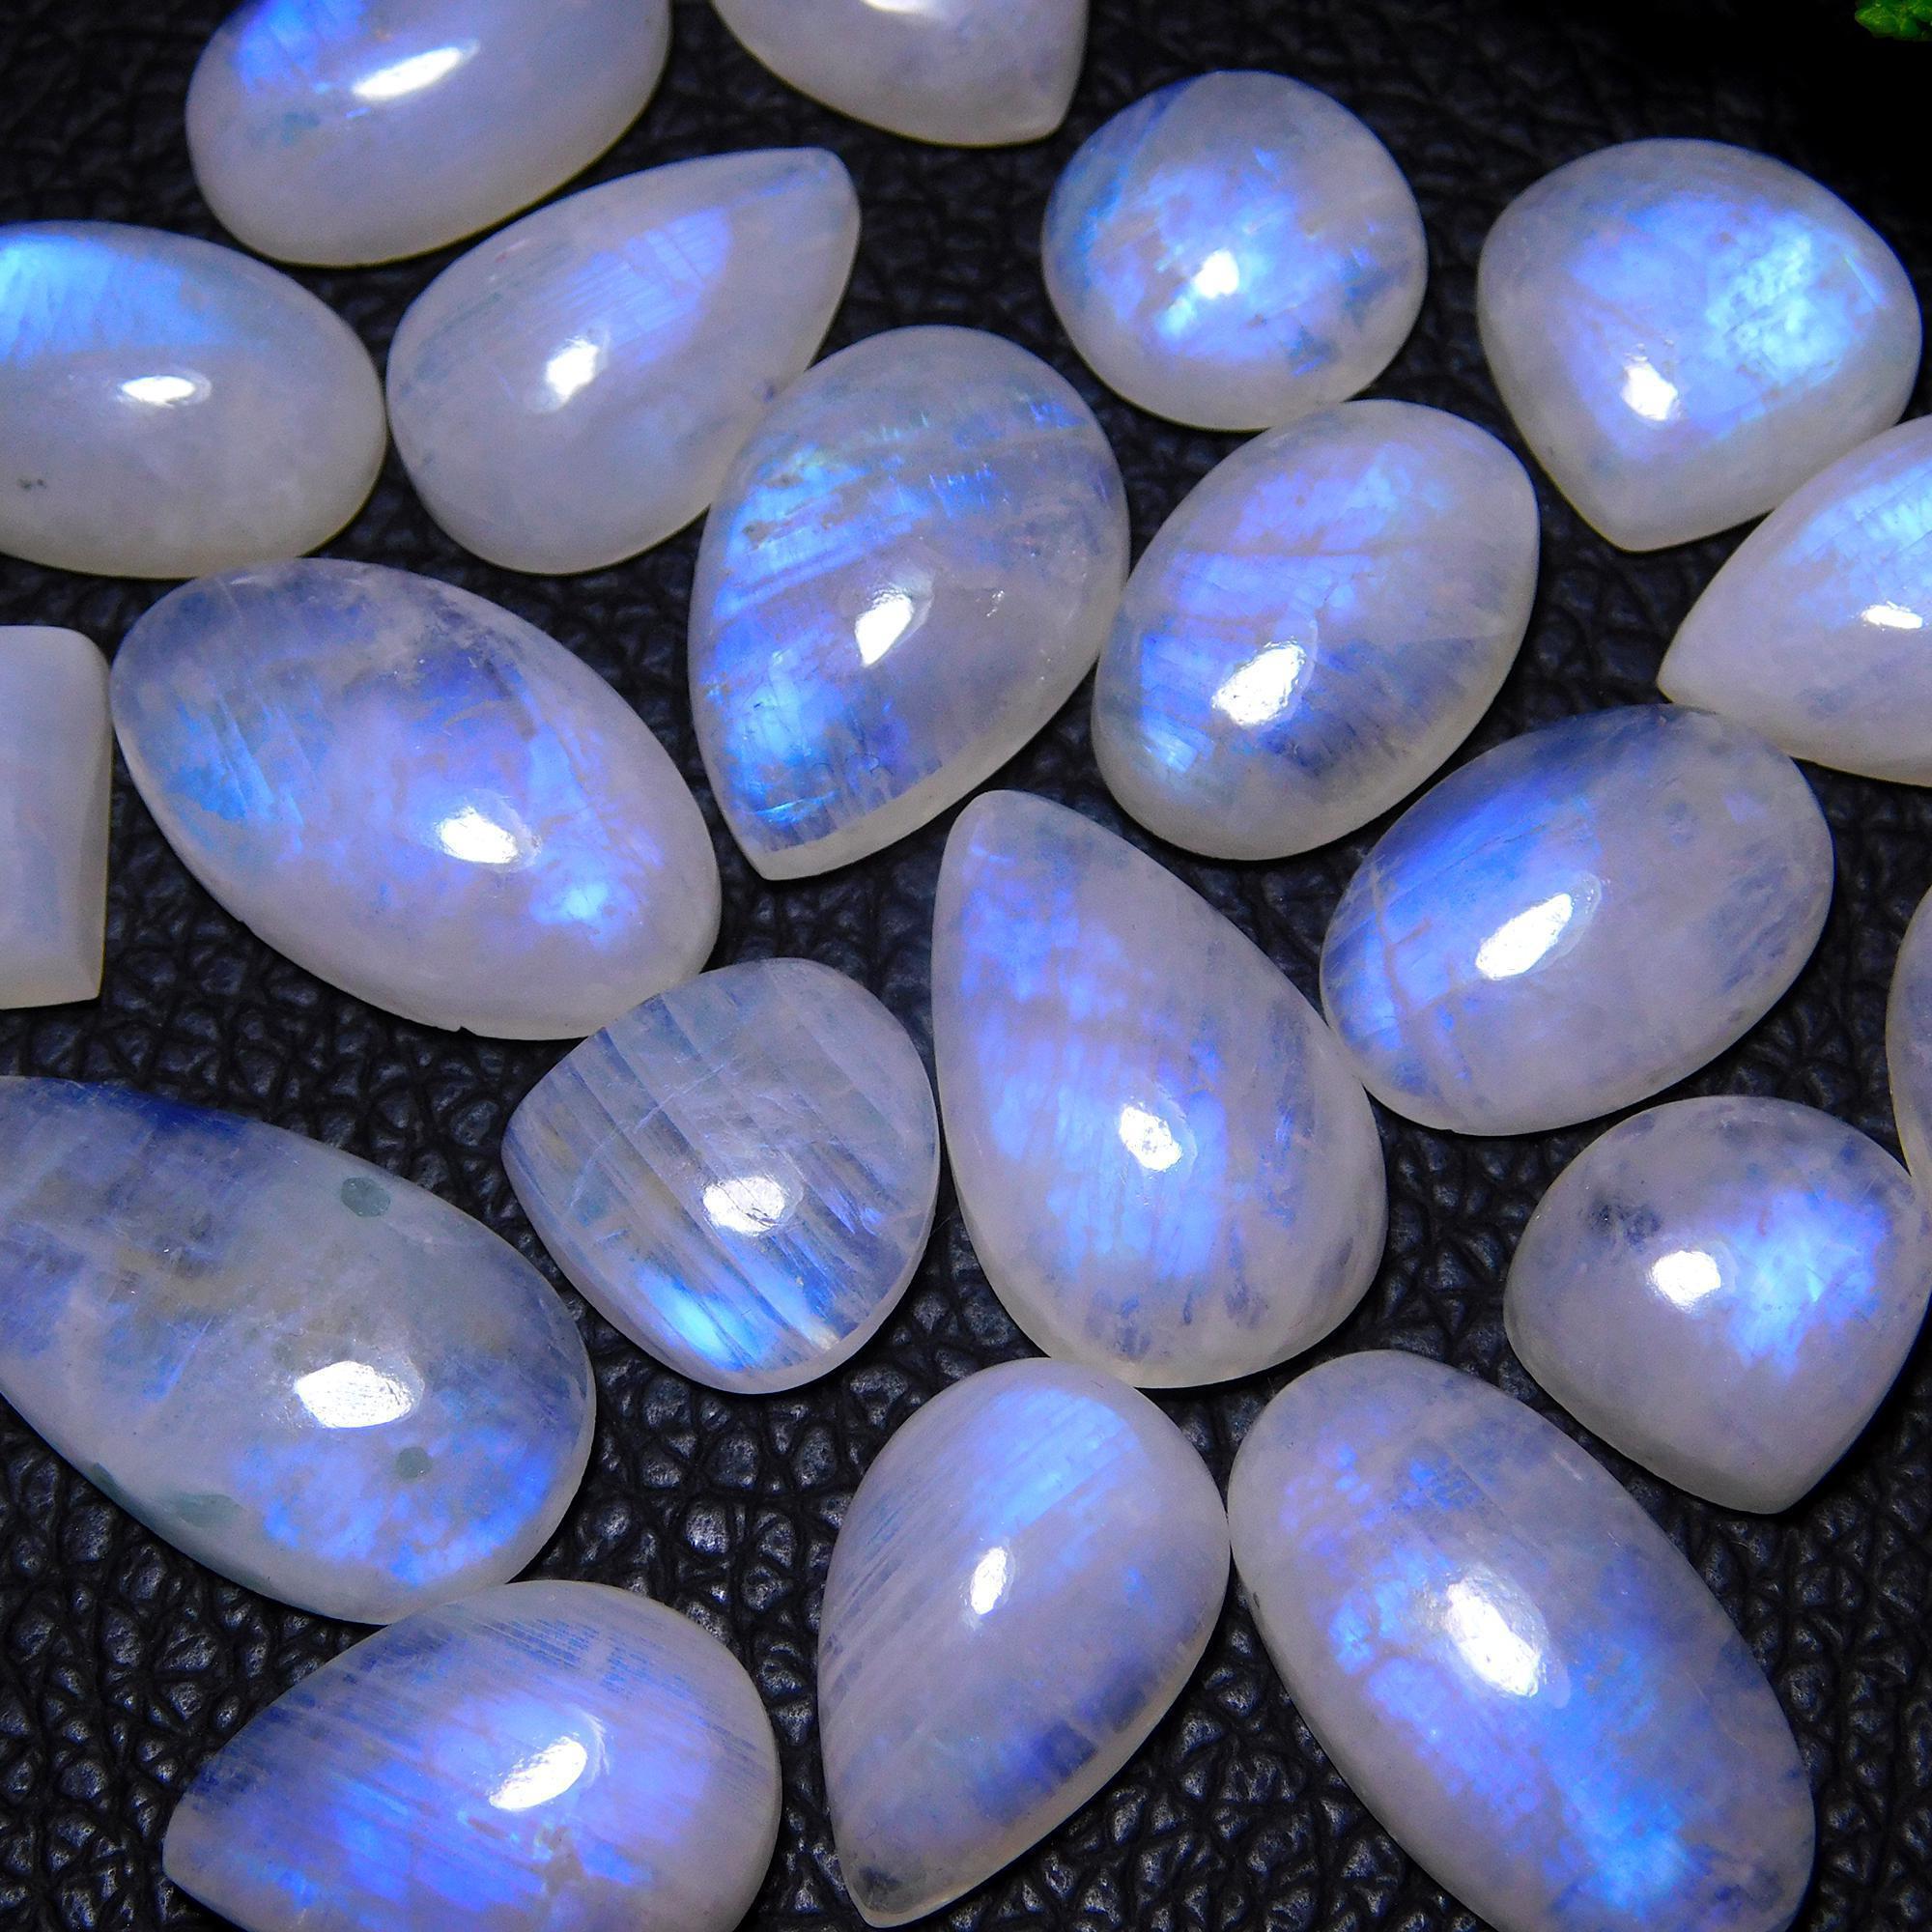 20Pcs 145Cts Natural Rainbow Moonstone Cabochon Blue Fire Loose Gemstone Crystal jewelry supplies wholesale lot gift for her Black Friday 24X12 11X11mm#9379